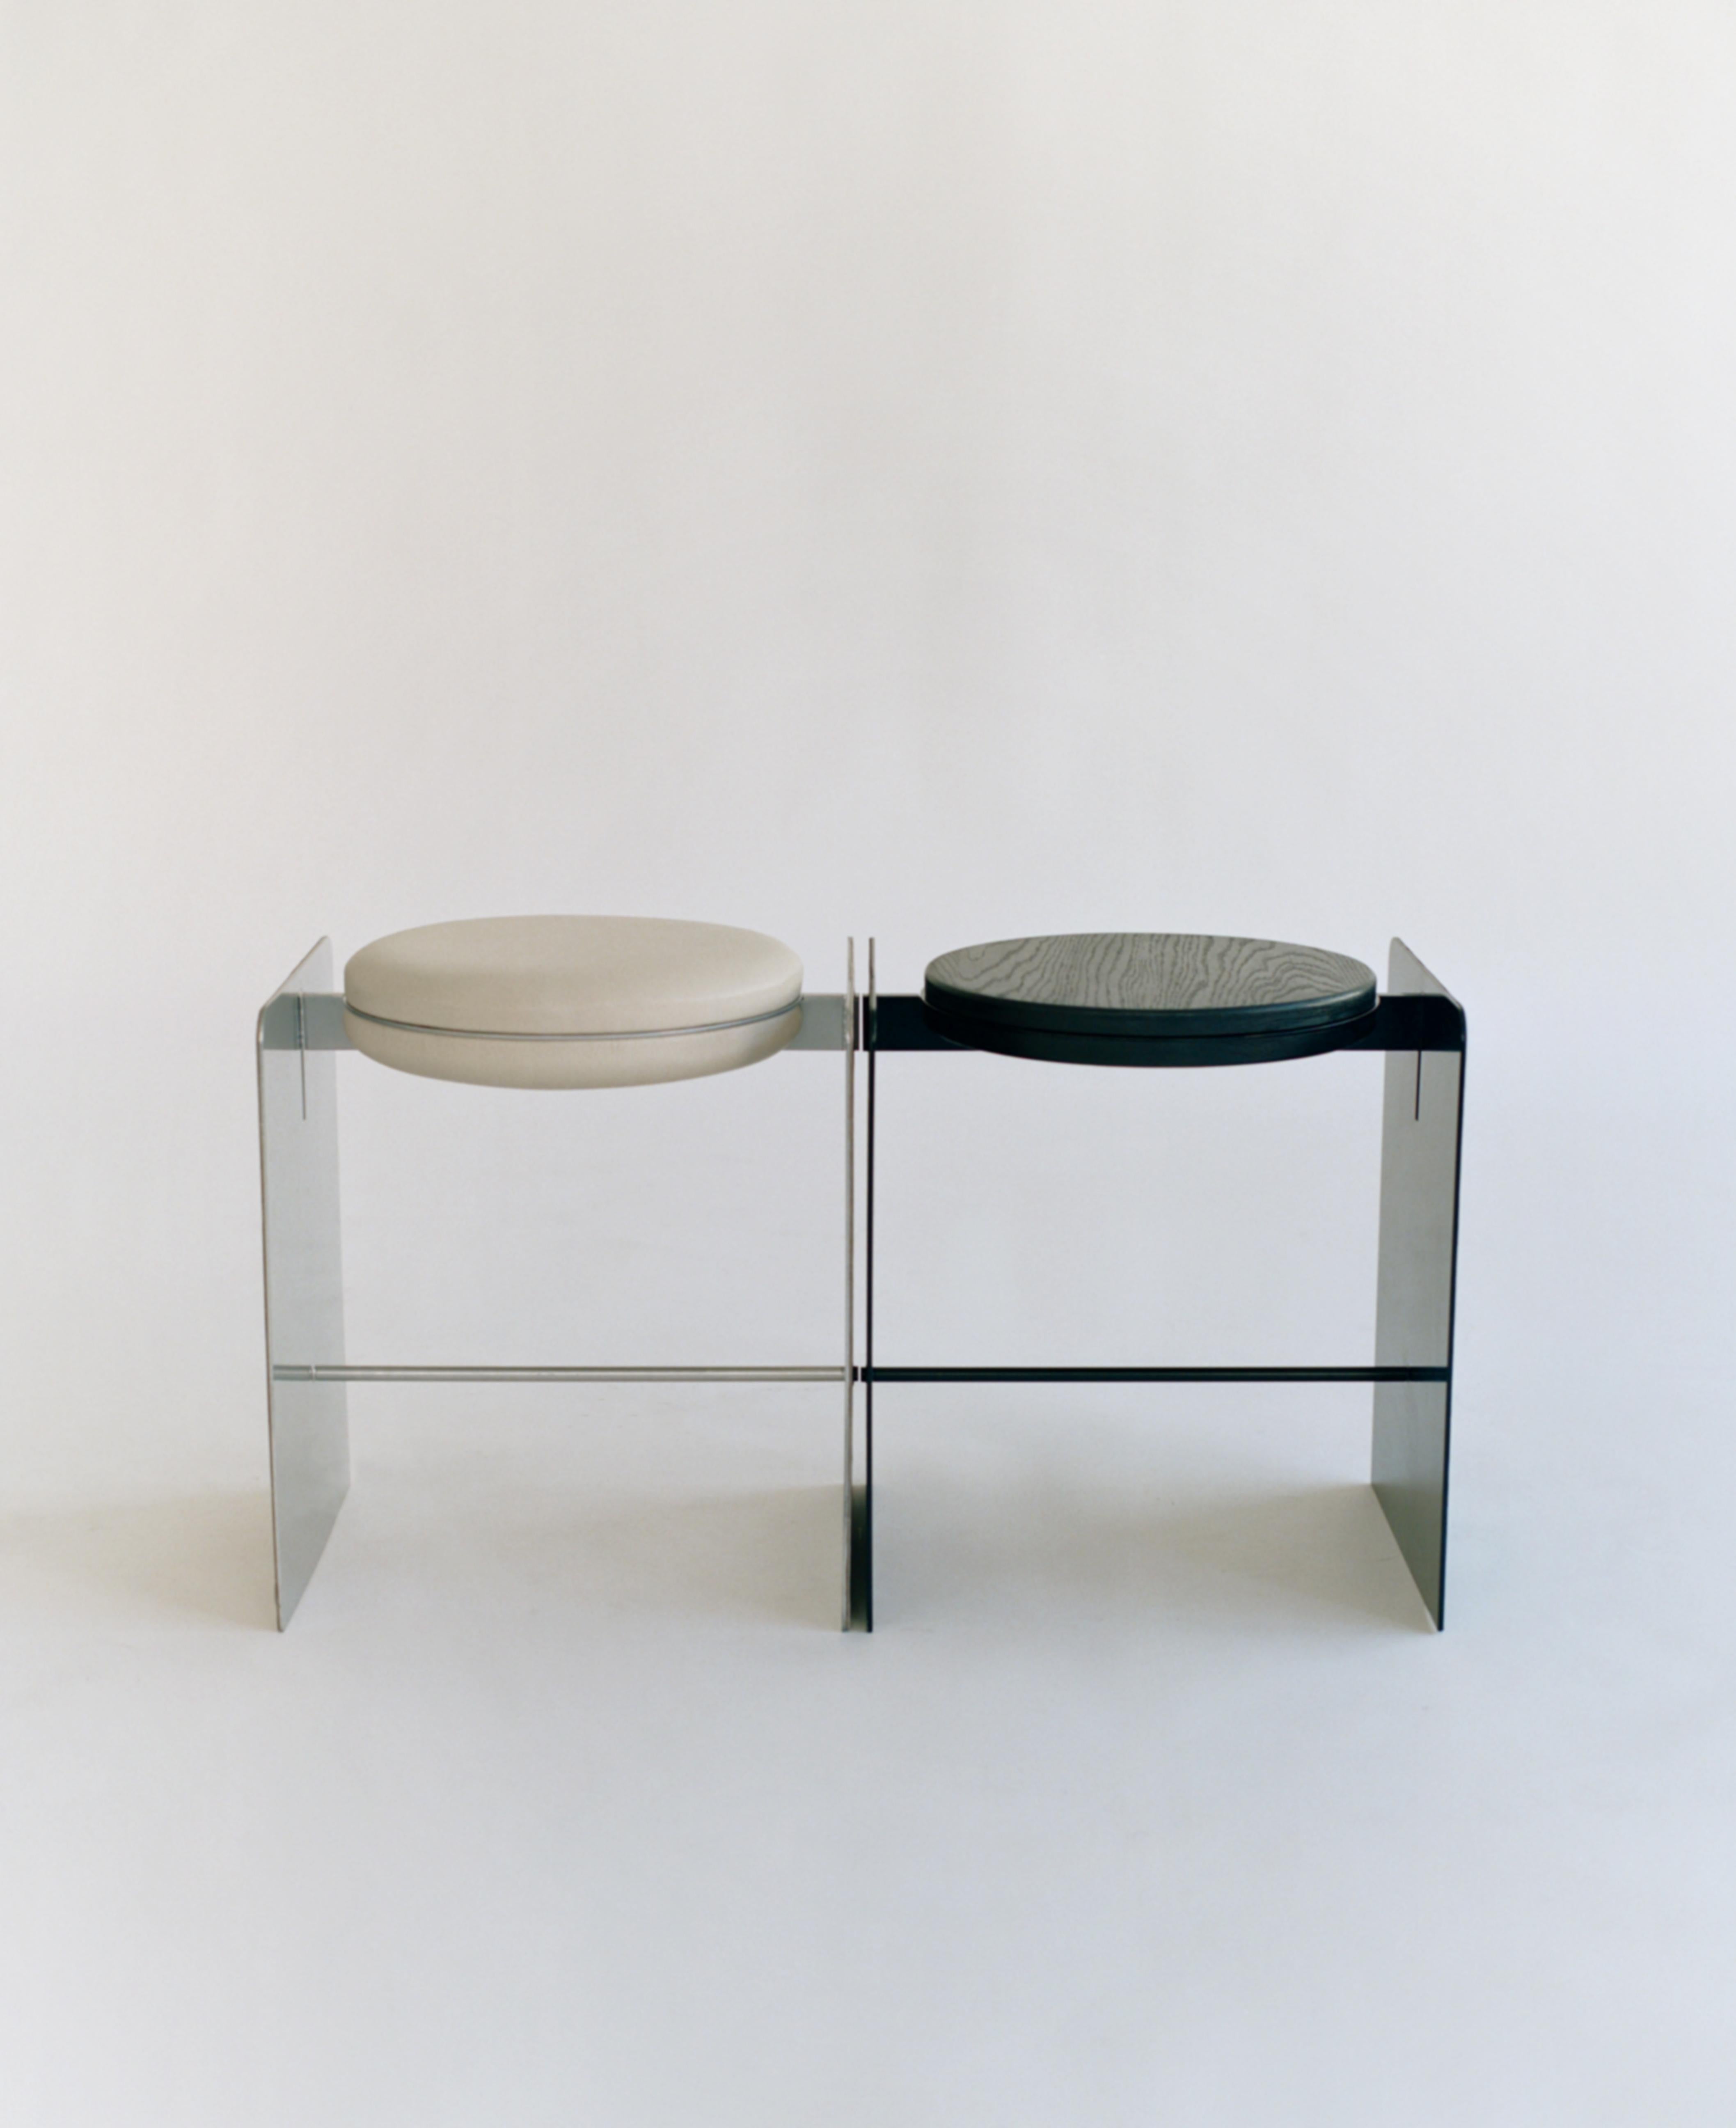 Pair of building blocks stool by Jialun Xiong
Dimensions: 19” W x 17” D x 19” H inch
Materials: metal and leather

COM/COL option available. 

“ I have an aptitude for exploring the nuances of infinite combination of materials. I’m always